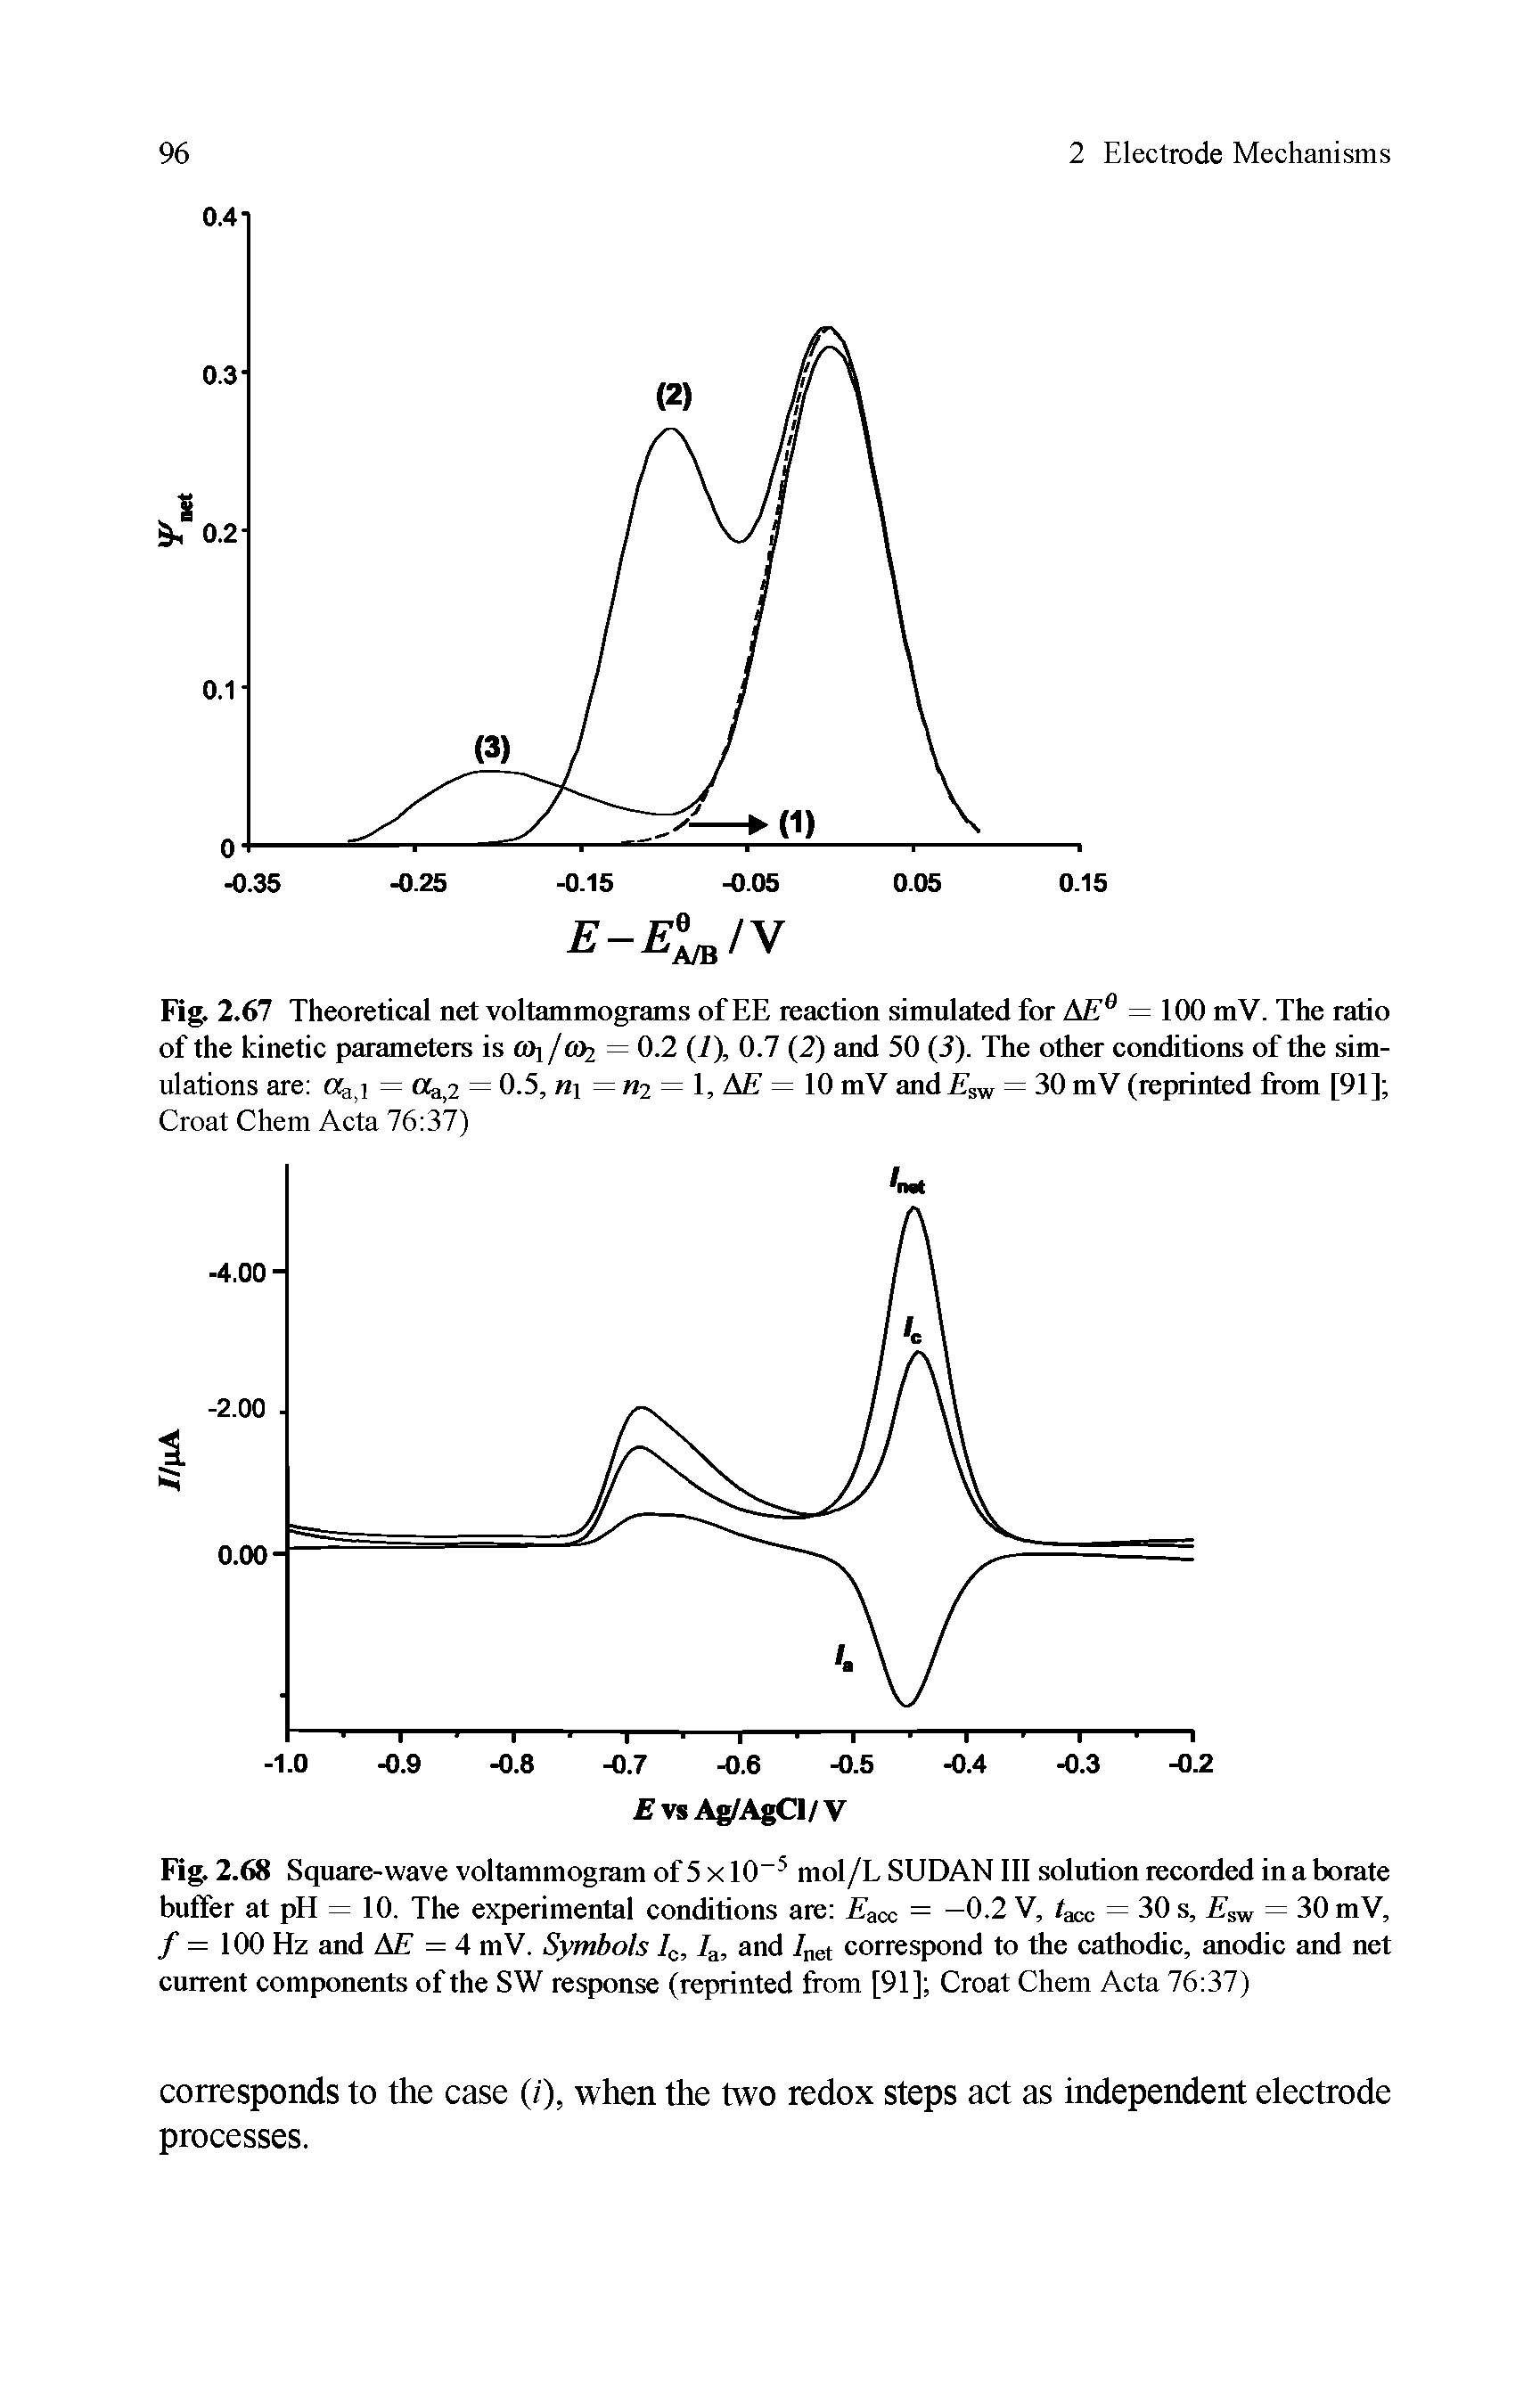 Fig. 2.68 Square-wave voltammogram of 5 x 10 mol/L SUDAN III solution recorded in a Ixuate buffer at pH = 10. The experimental conditions are itacc = —0.2 V, = 30 s, = 30 mV, / = 100 Hz and ML = 4 mV. Symbols 4, 4, and /net correspond to the cathodic, anodic and net current components of the SW response (reprinted from [91] Croat Chem Acta 76 37)...